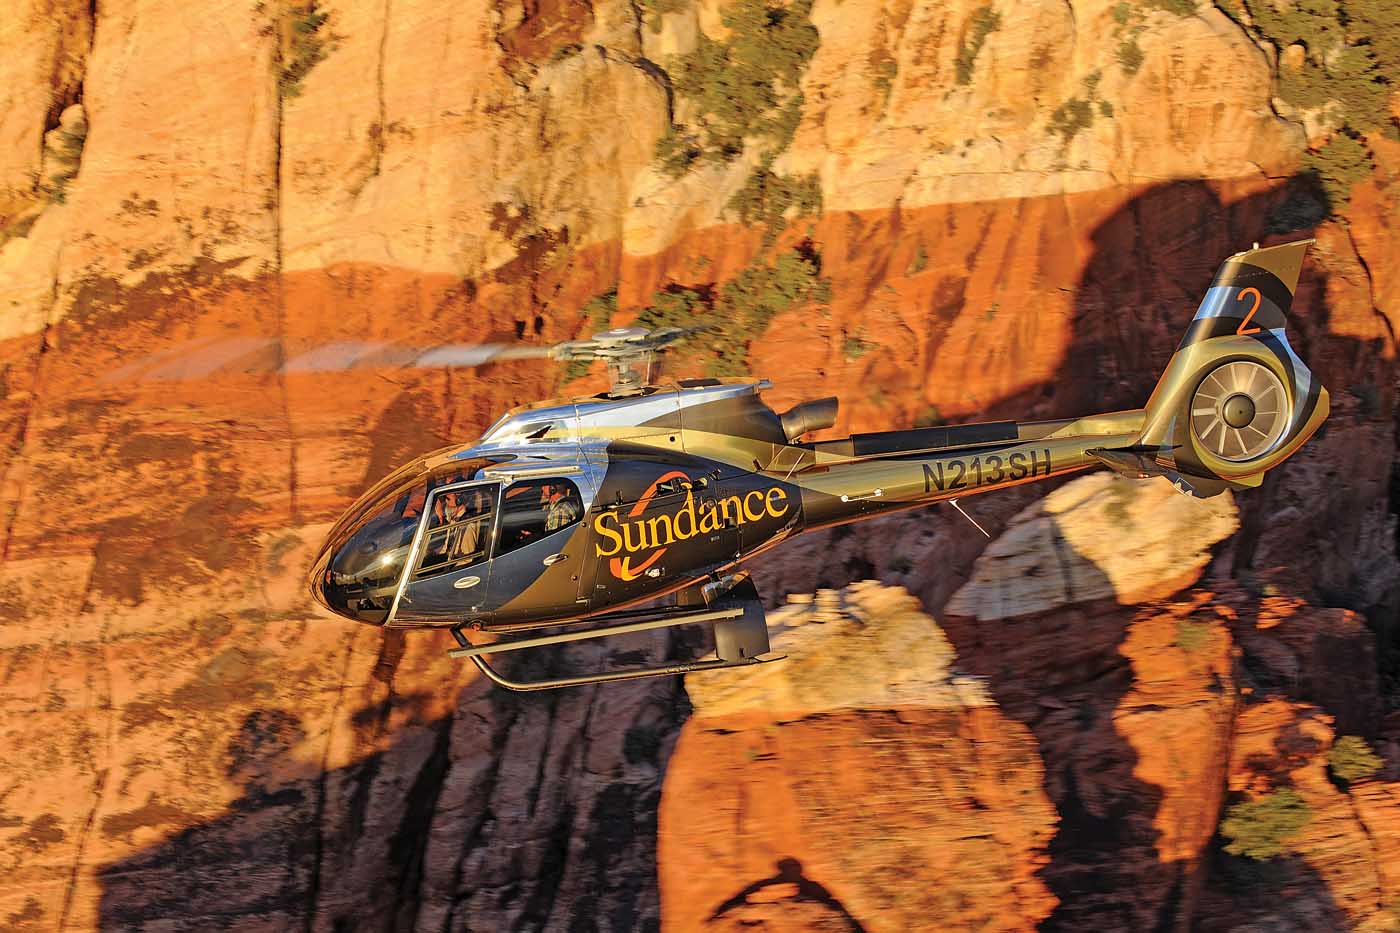 Sundance Helicopters’ fleet included the Airbus H130 (pictured) and the AS350 B2. Anthony Pecchi Photo